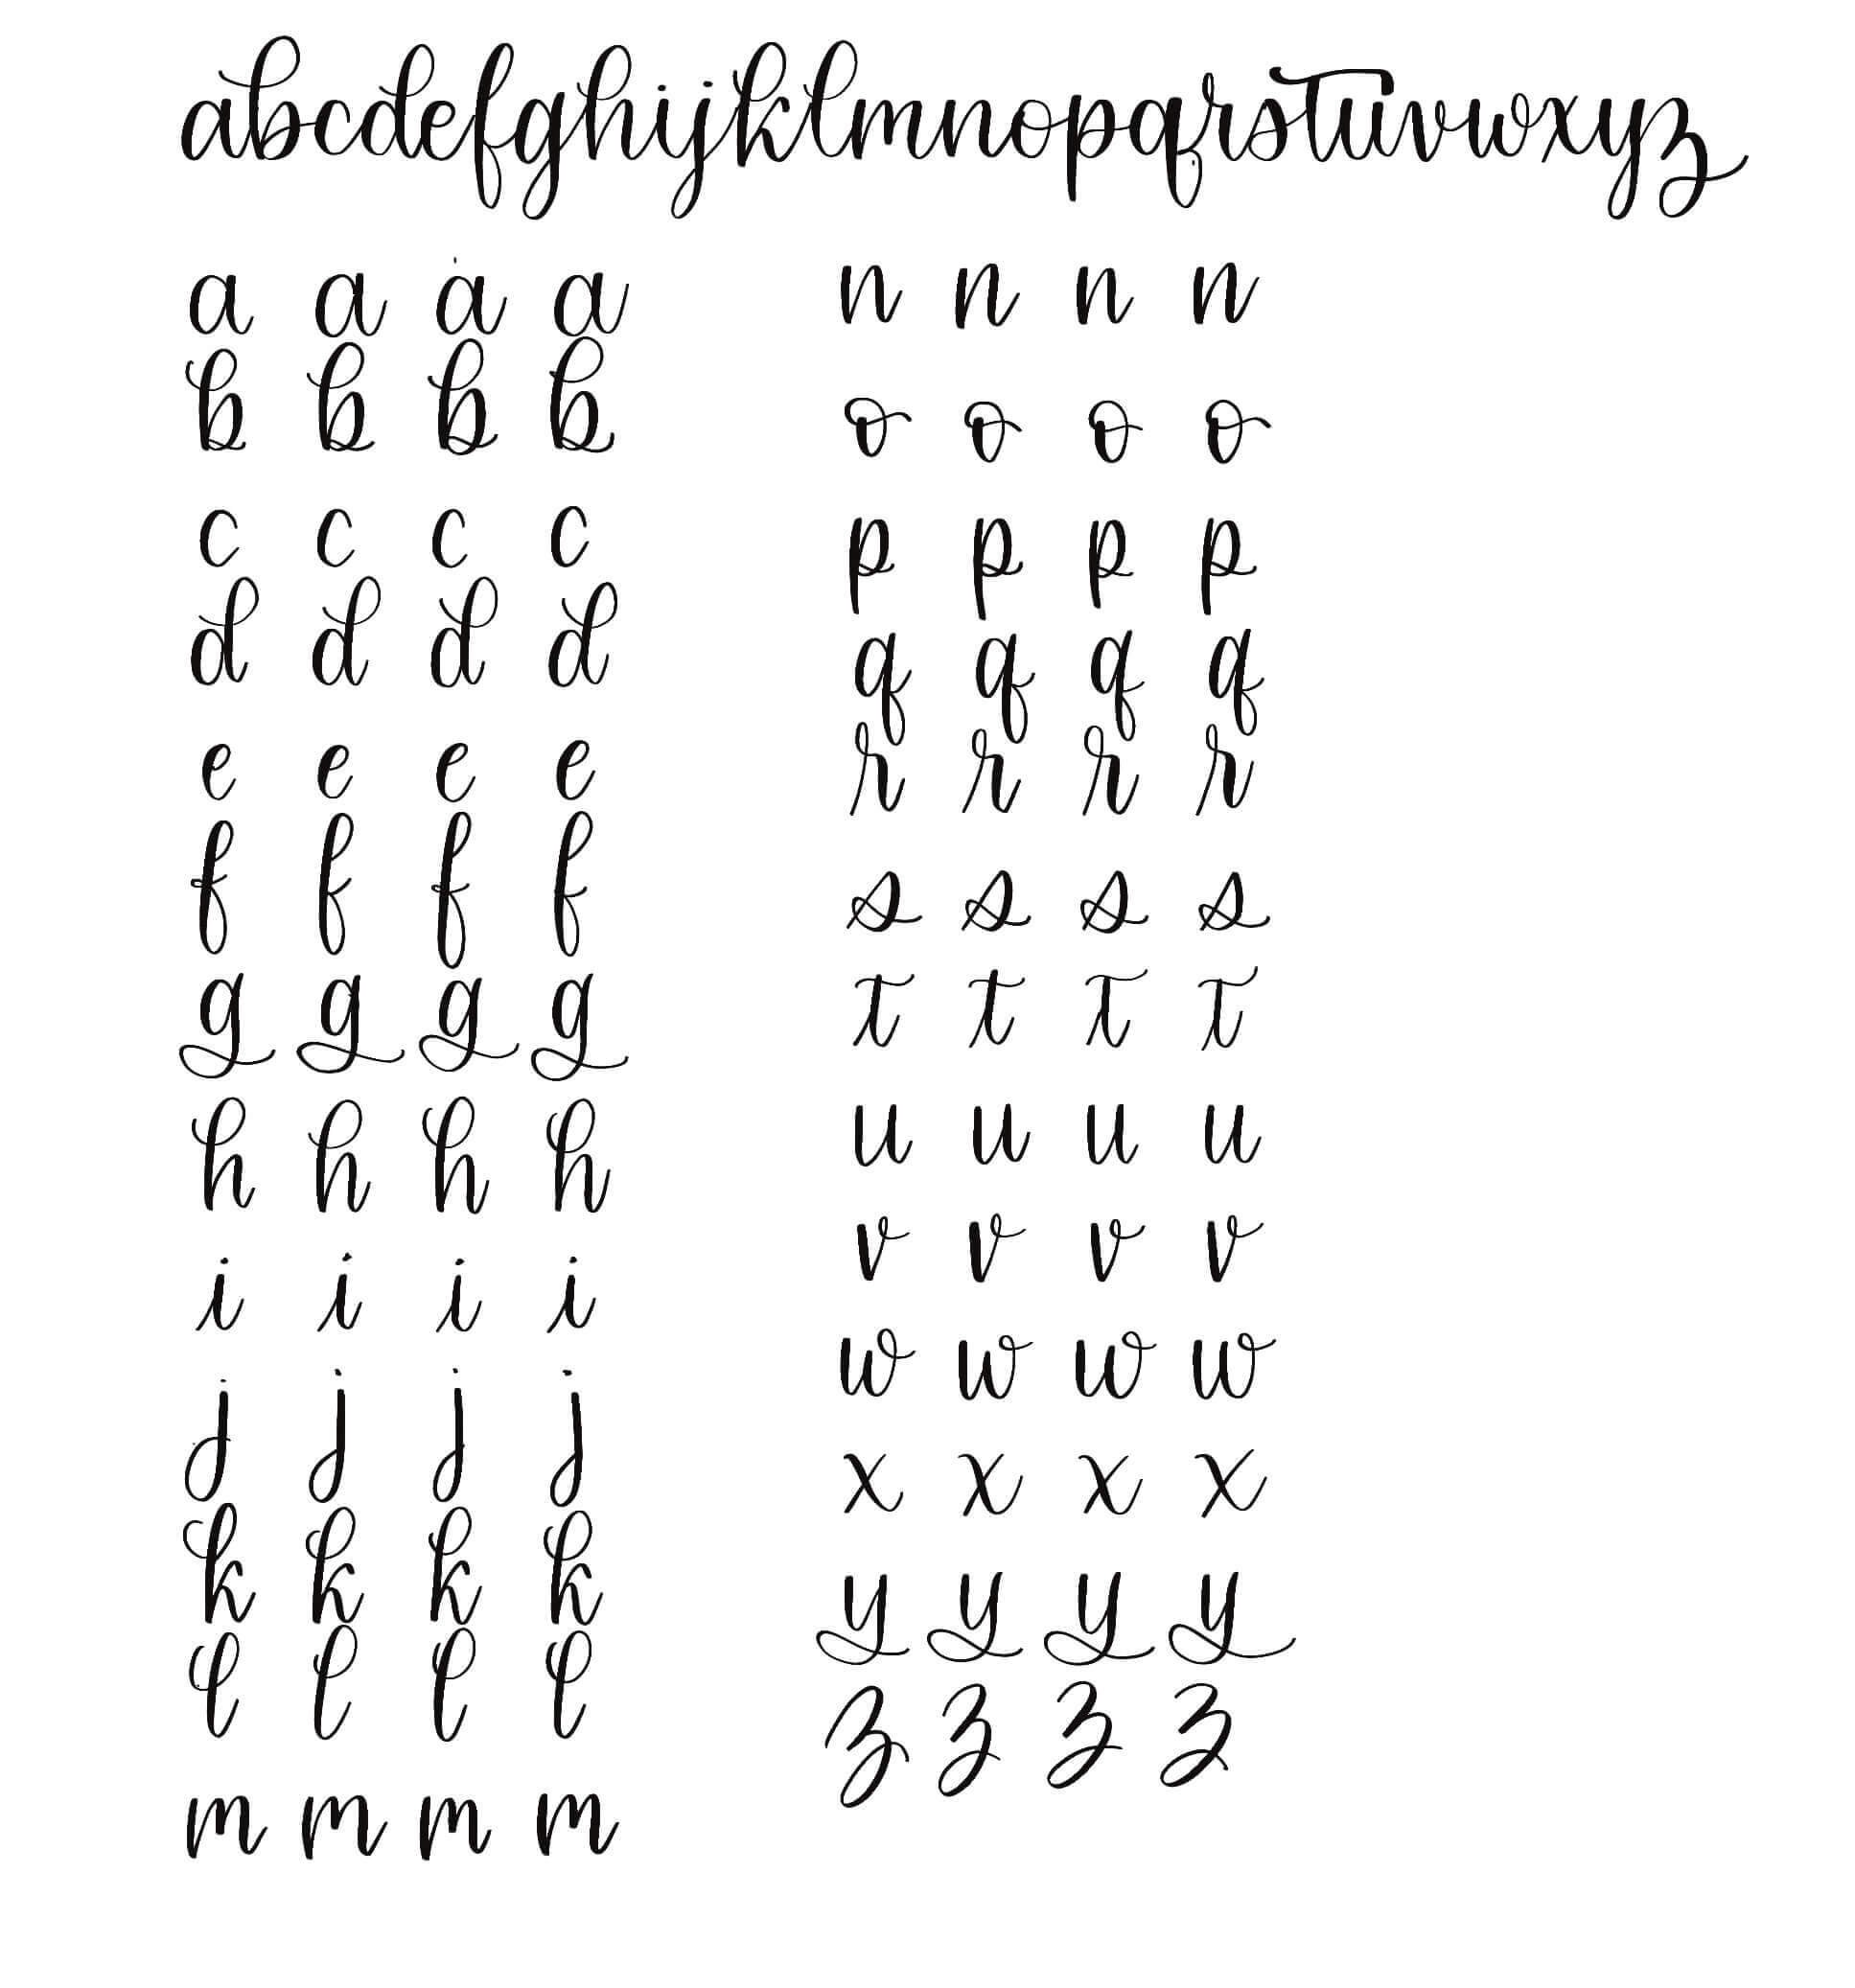 Faux Calligraphy Tutorial: Numbers + Free Practice Sheet